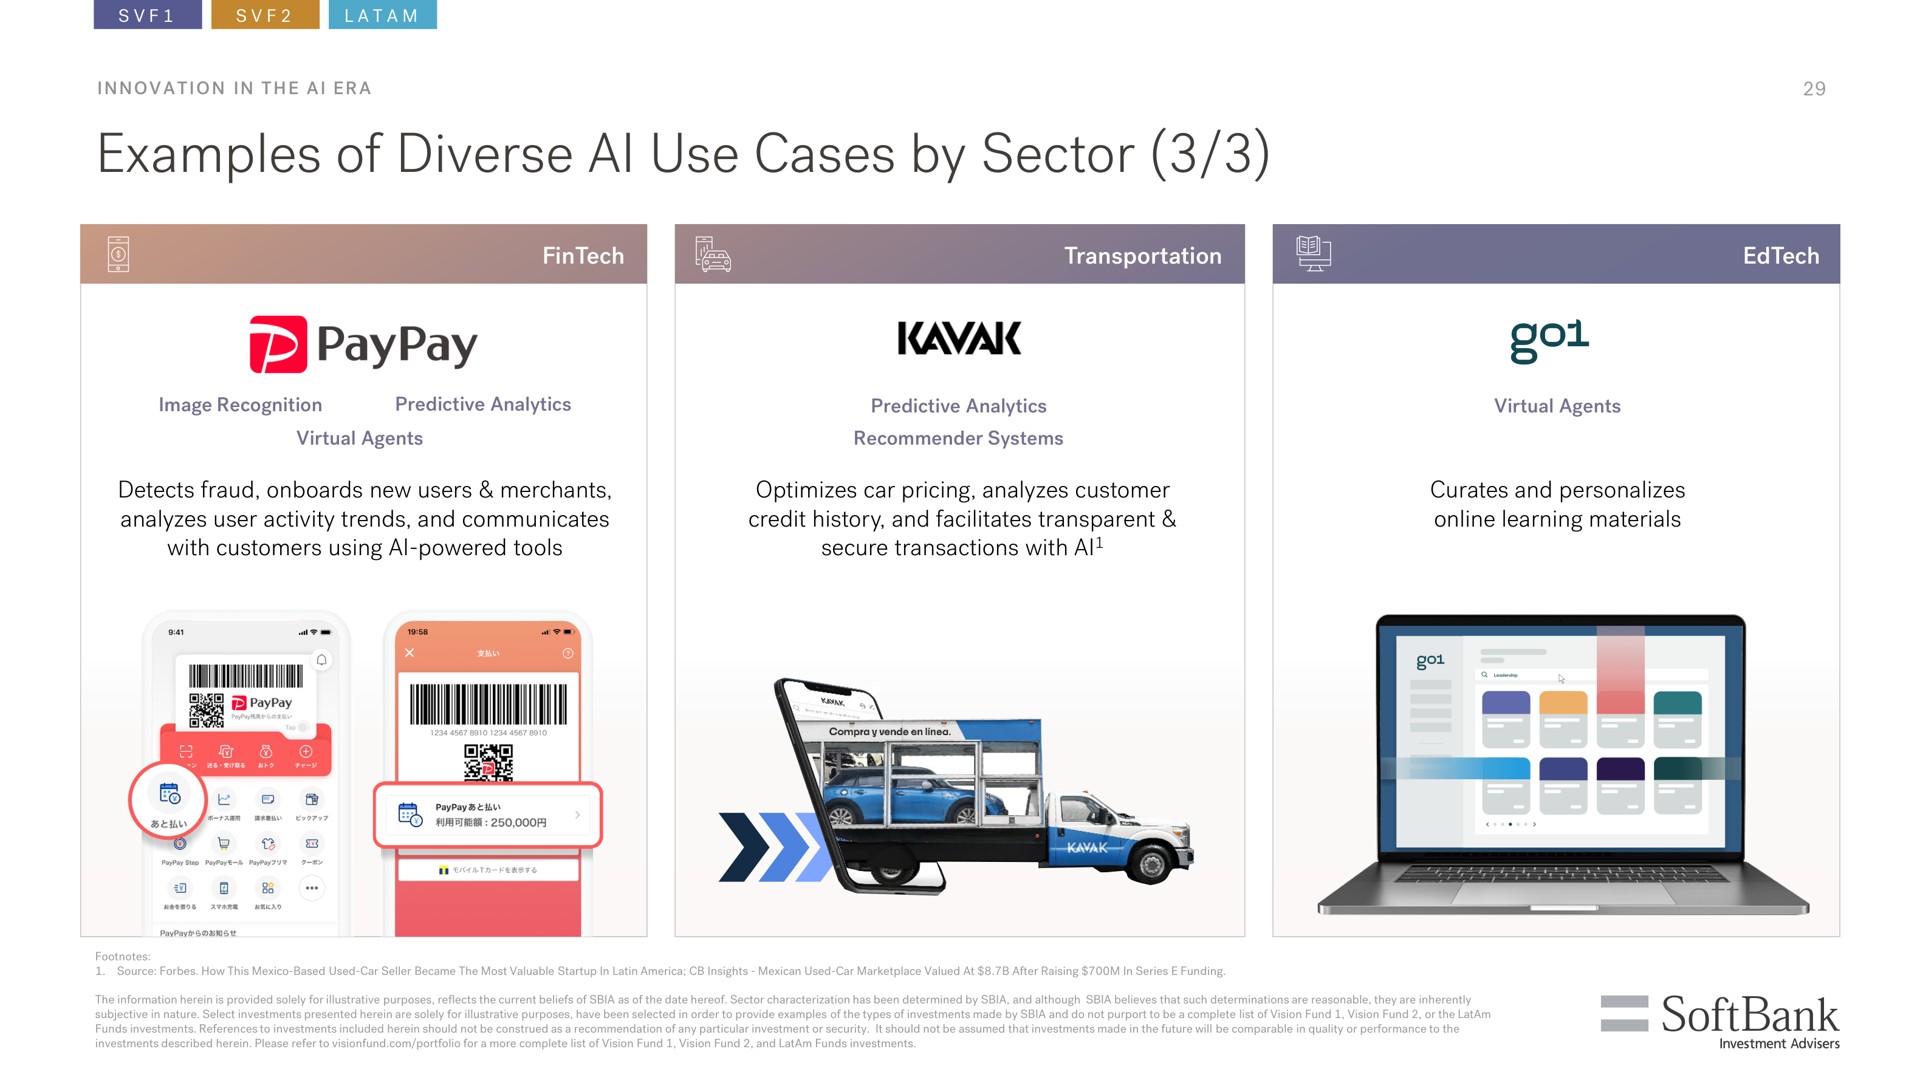 examples of diverse use cases by sector go | SoftBank